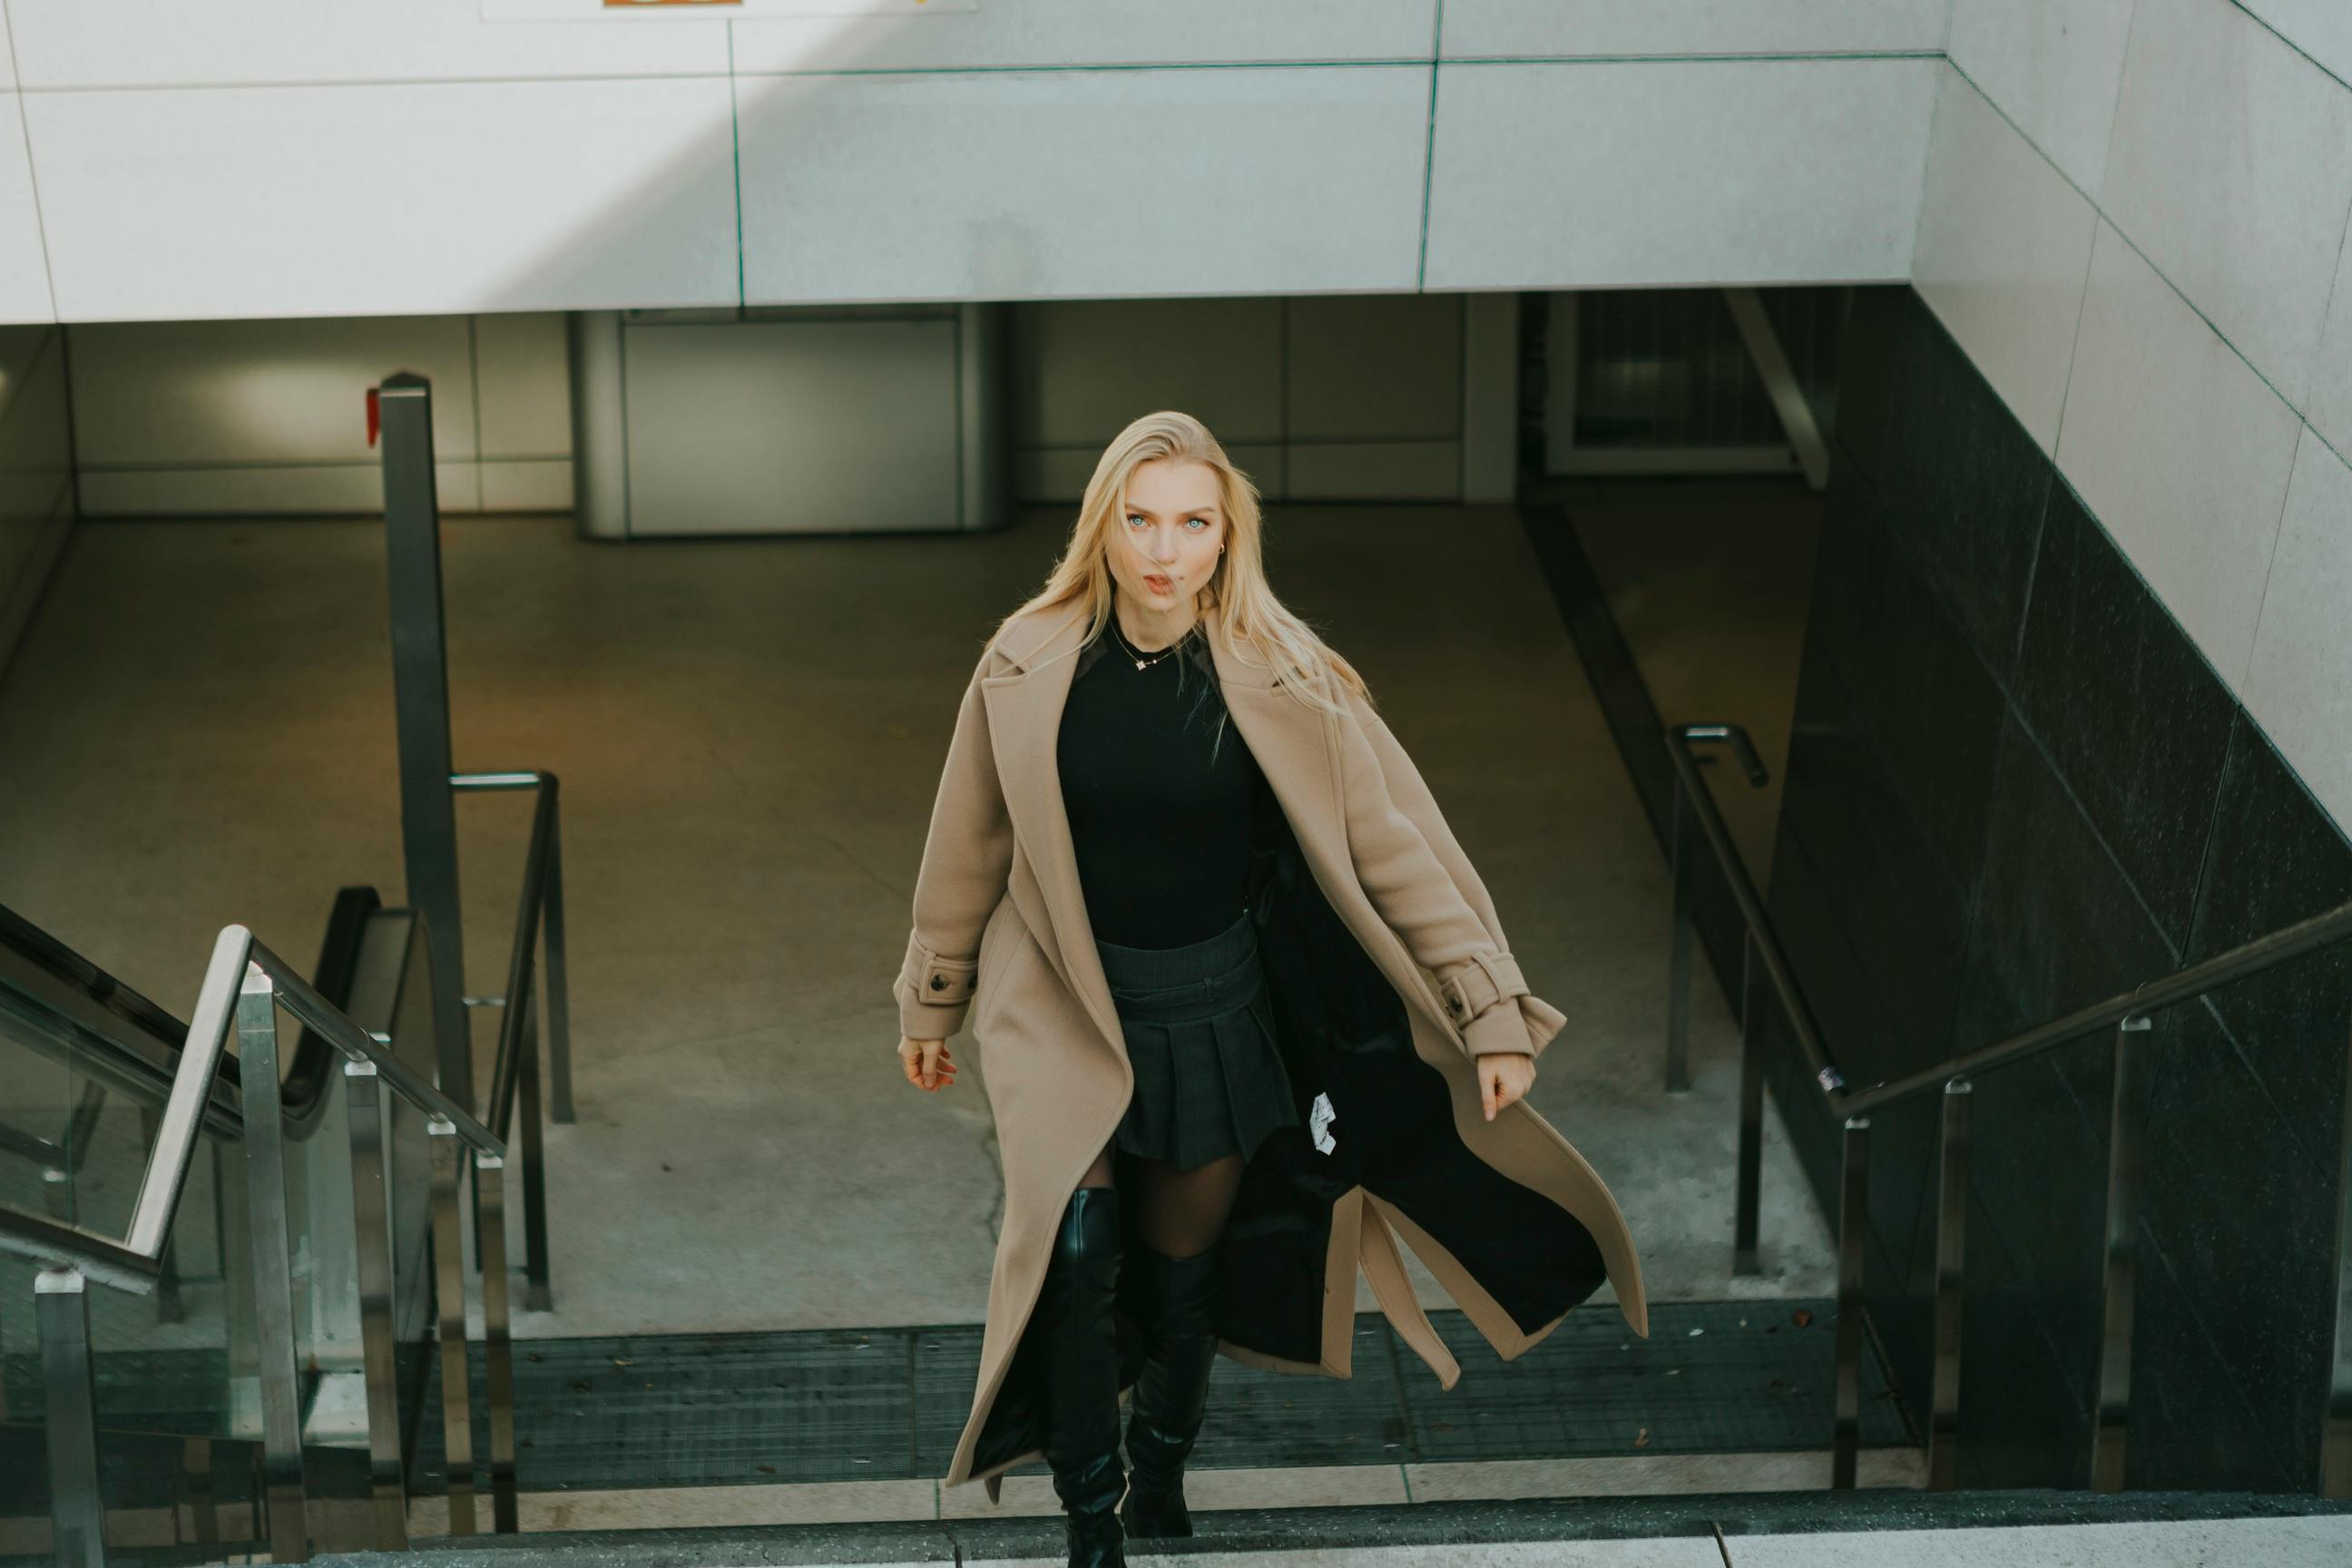 A determined-looking woman walking up a flight of stairs | Source: Pexels